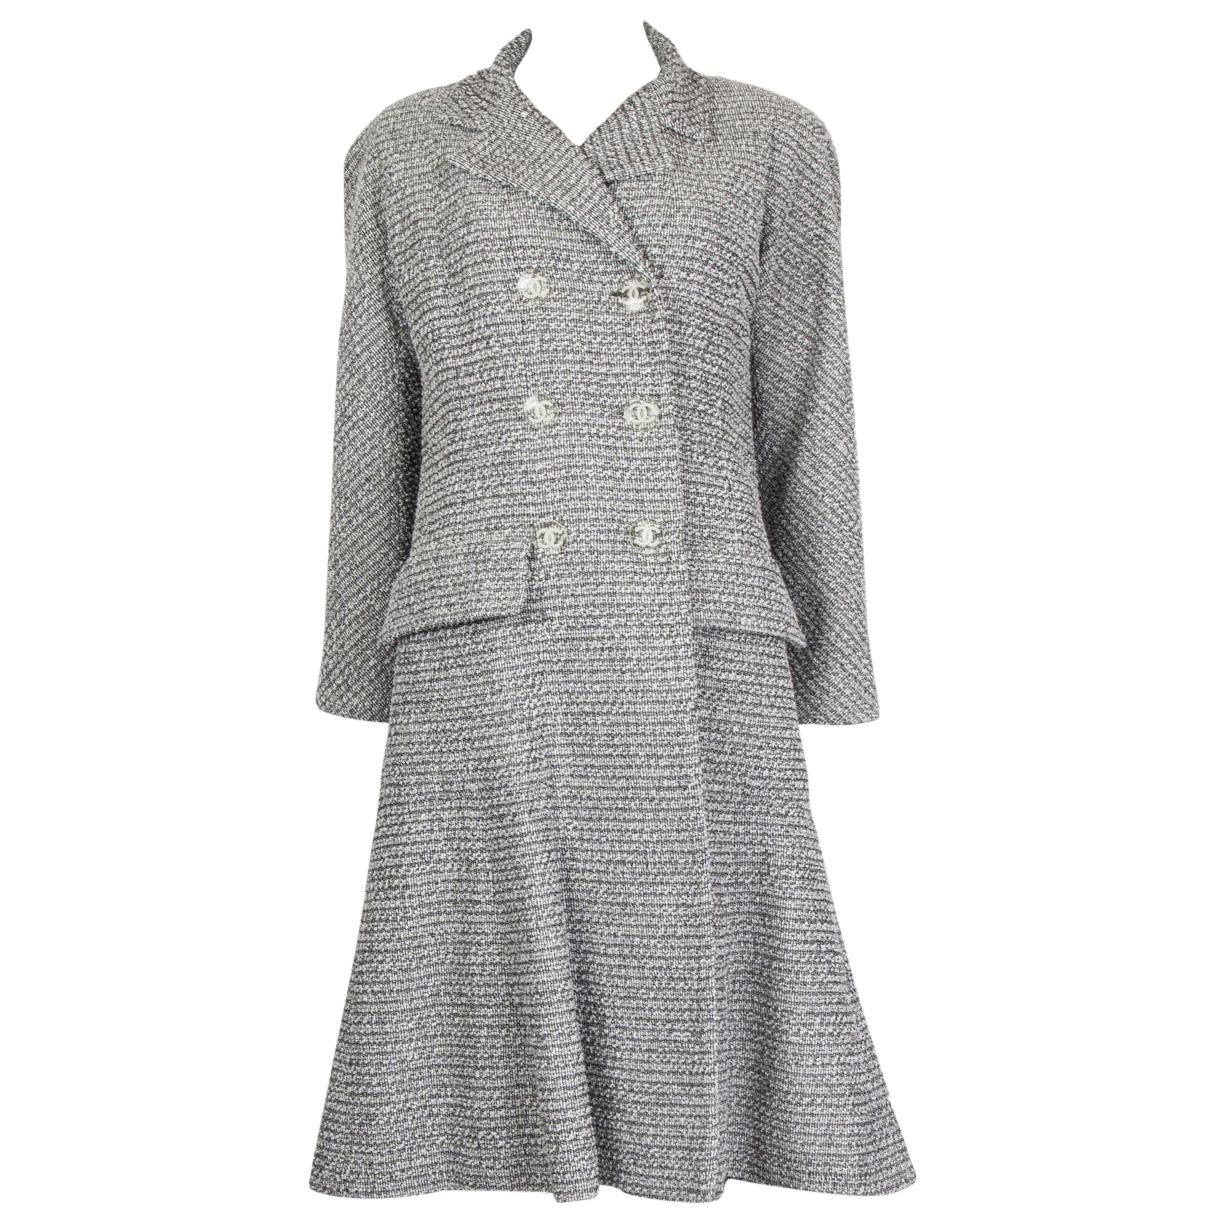 CHANEL white & black cotton Double-Breasted Tweed Coat Jacket 38 S